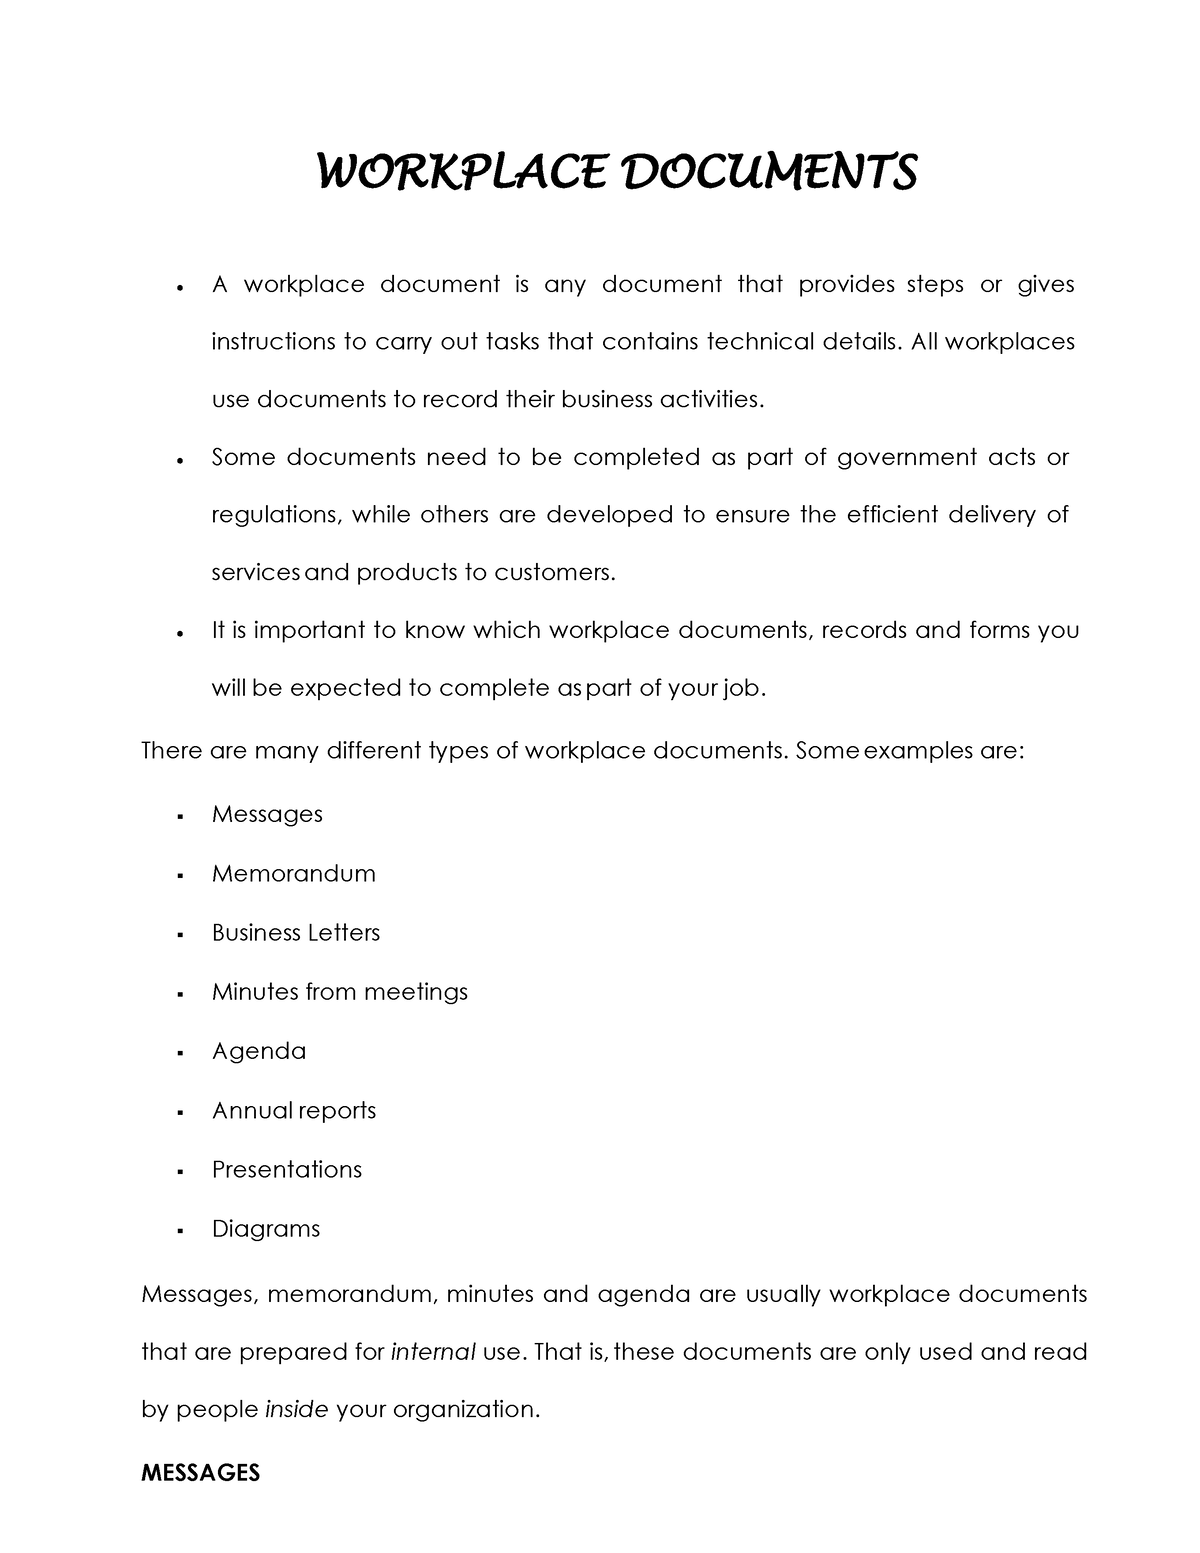 workplace-documents-reference-workplace-documents-a-workplace